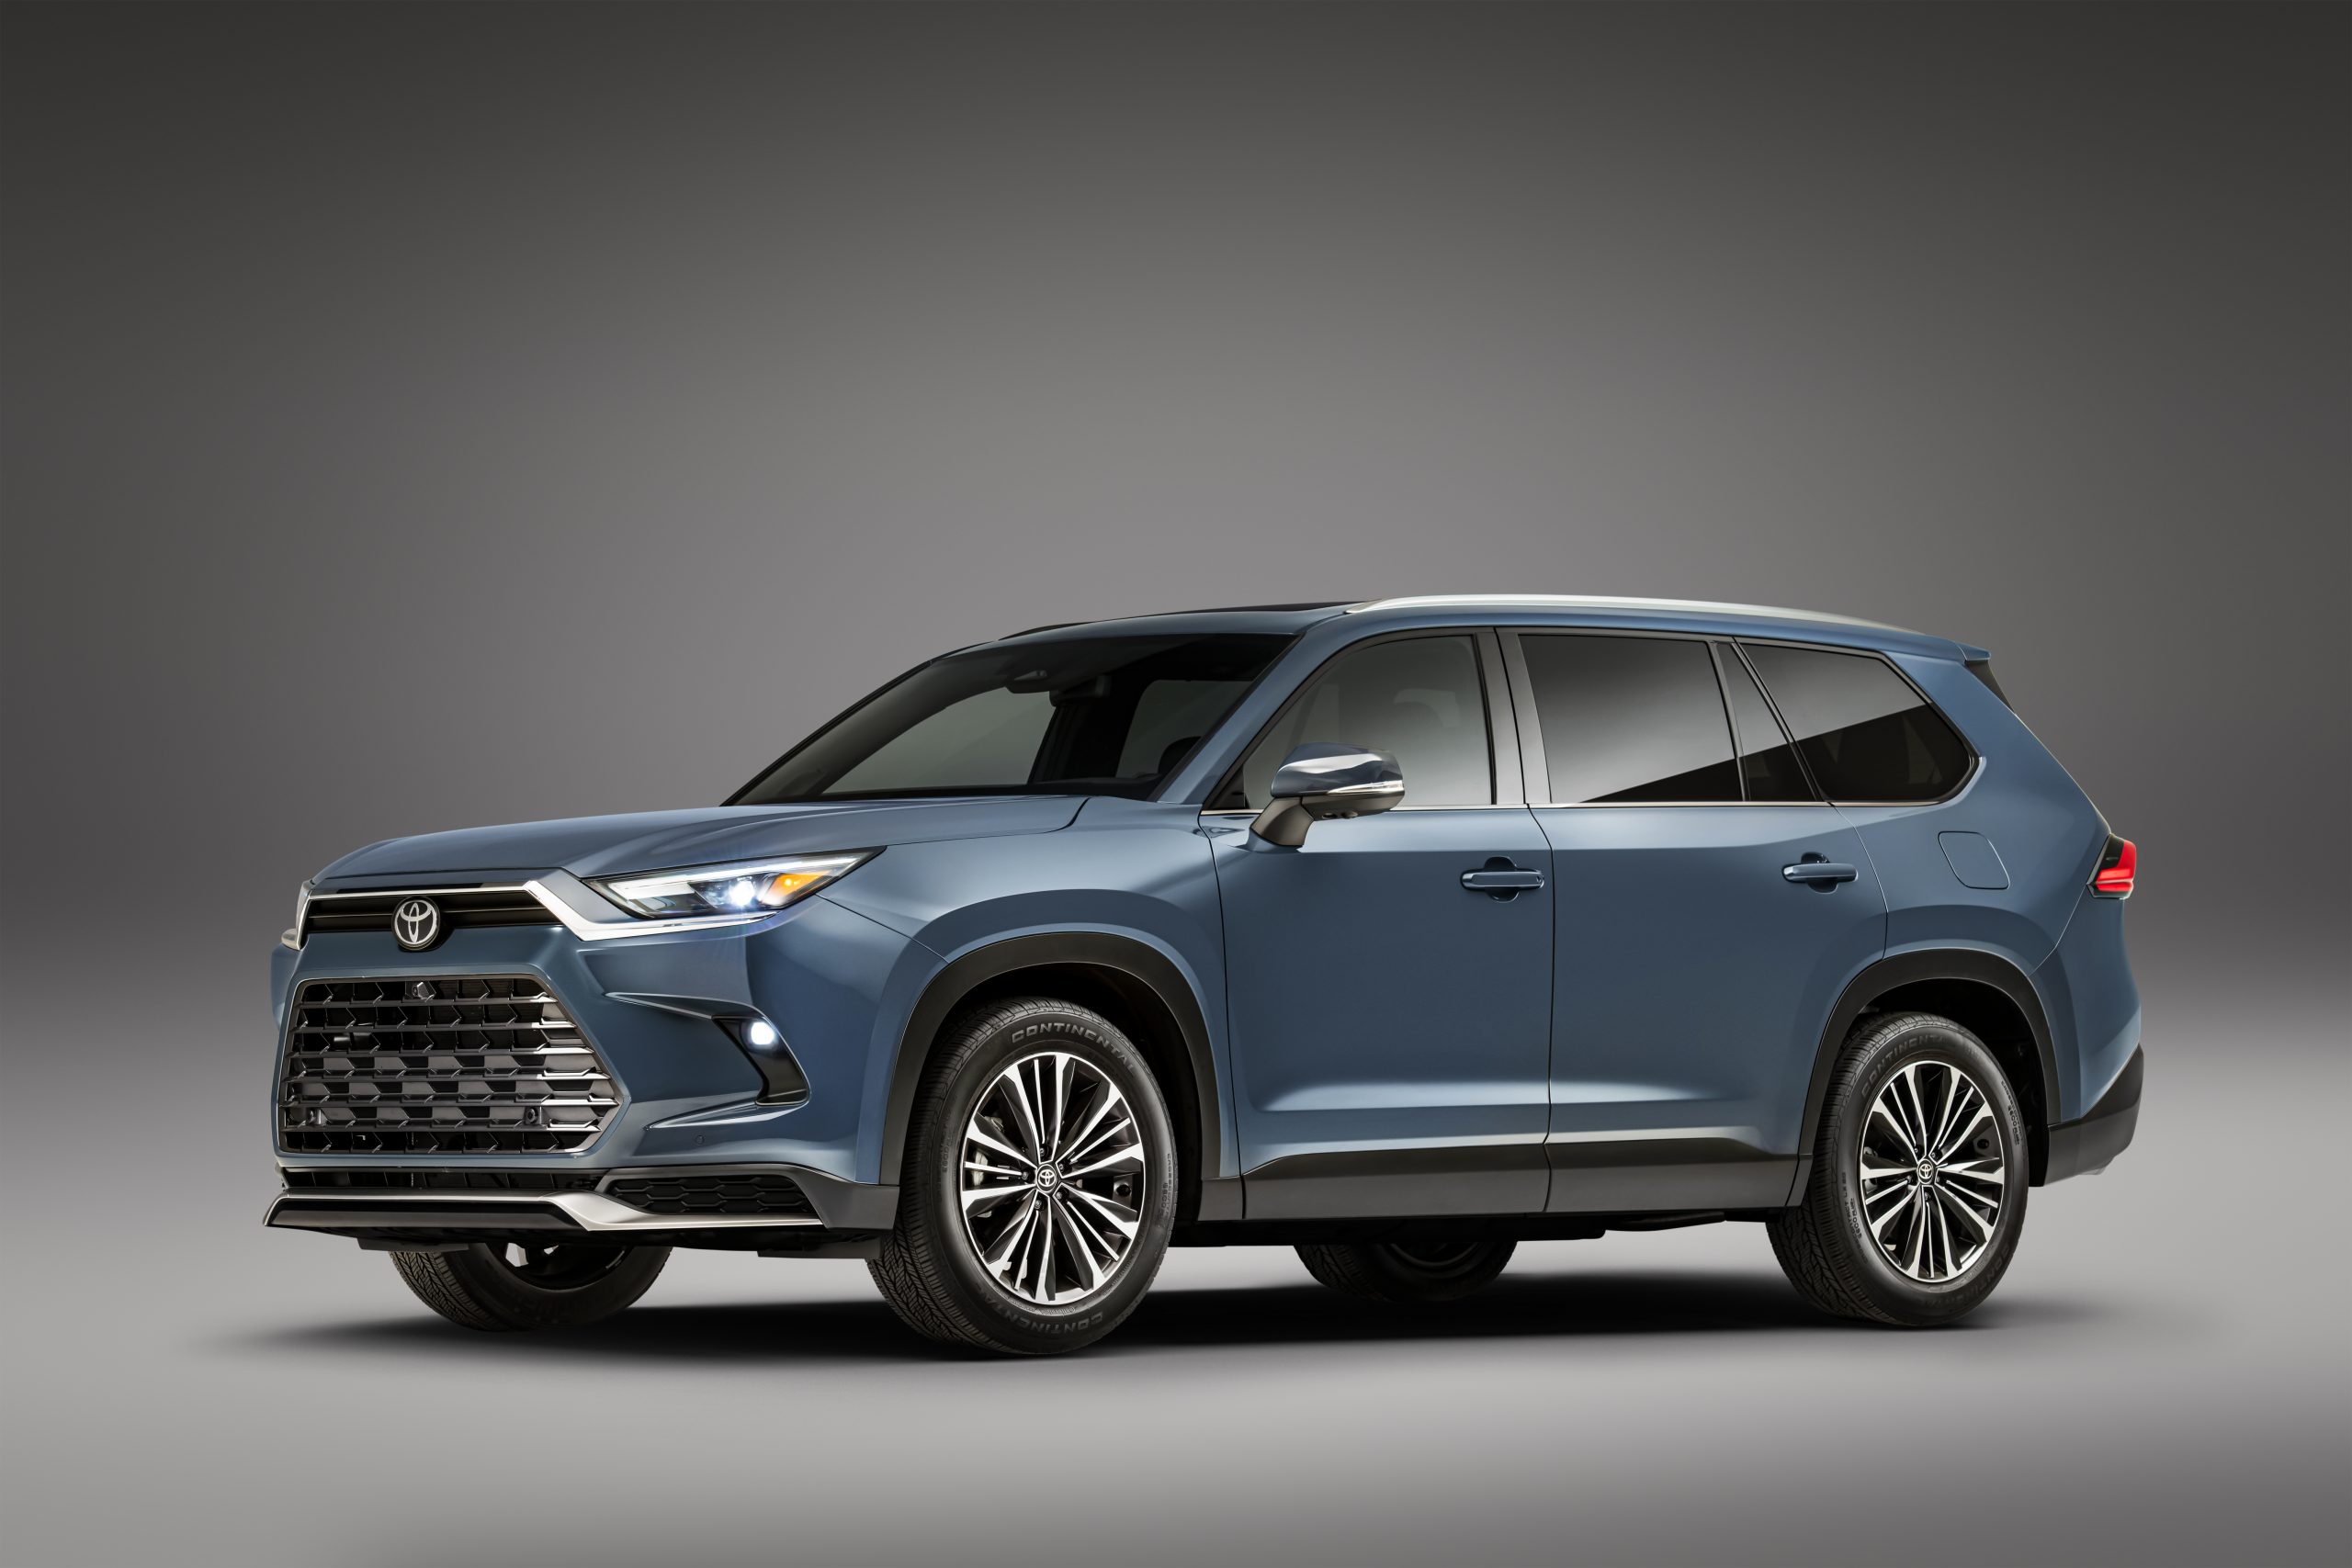 2022 Toyota Highlander Interior : Discover the All-New Luxurious Design